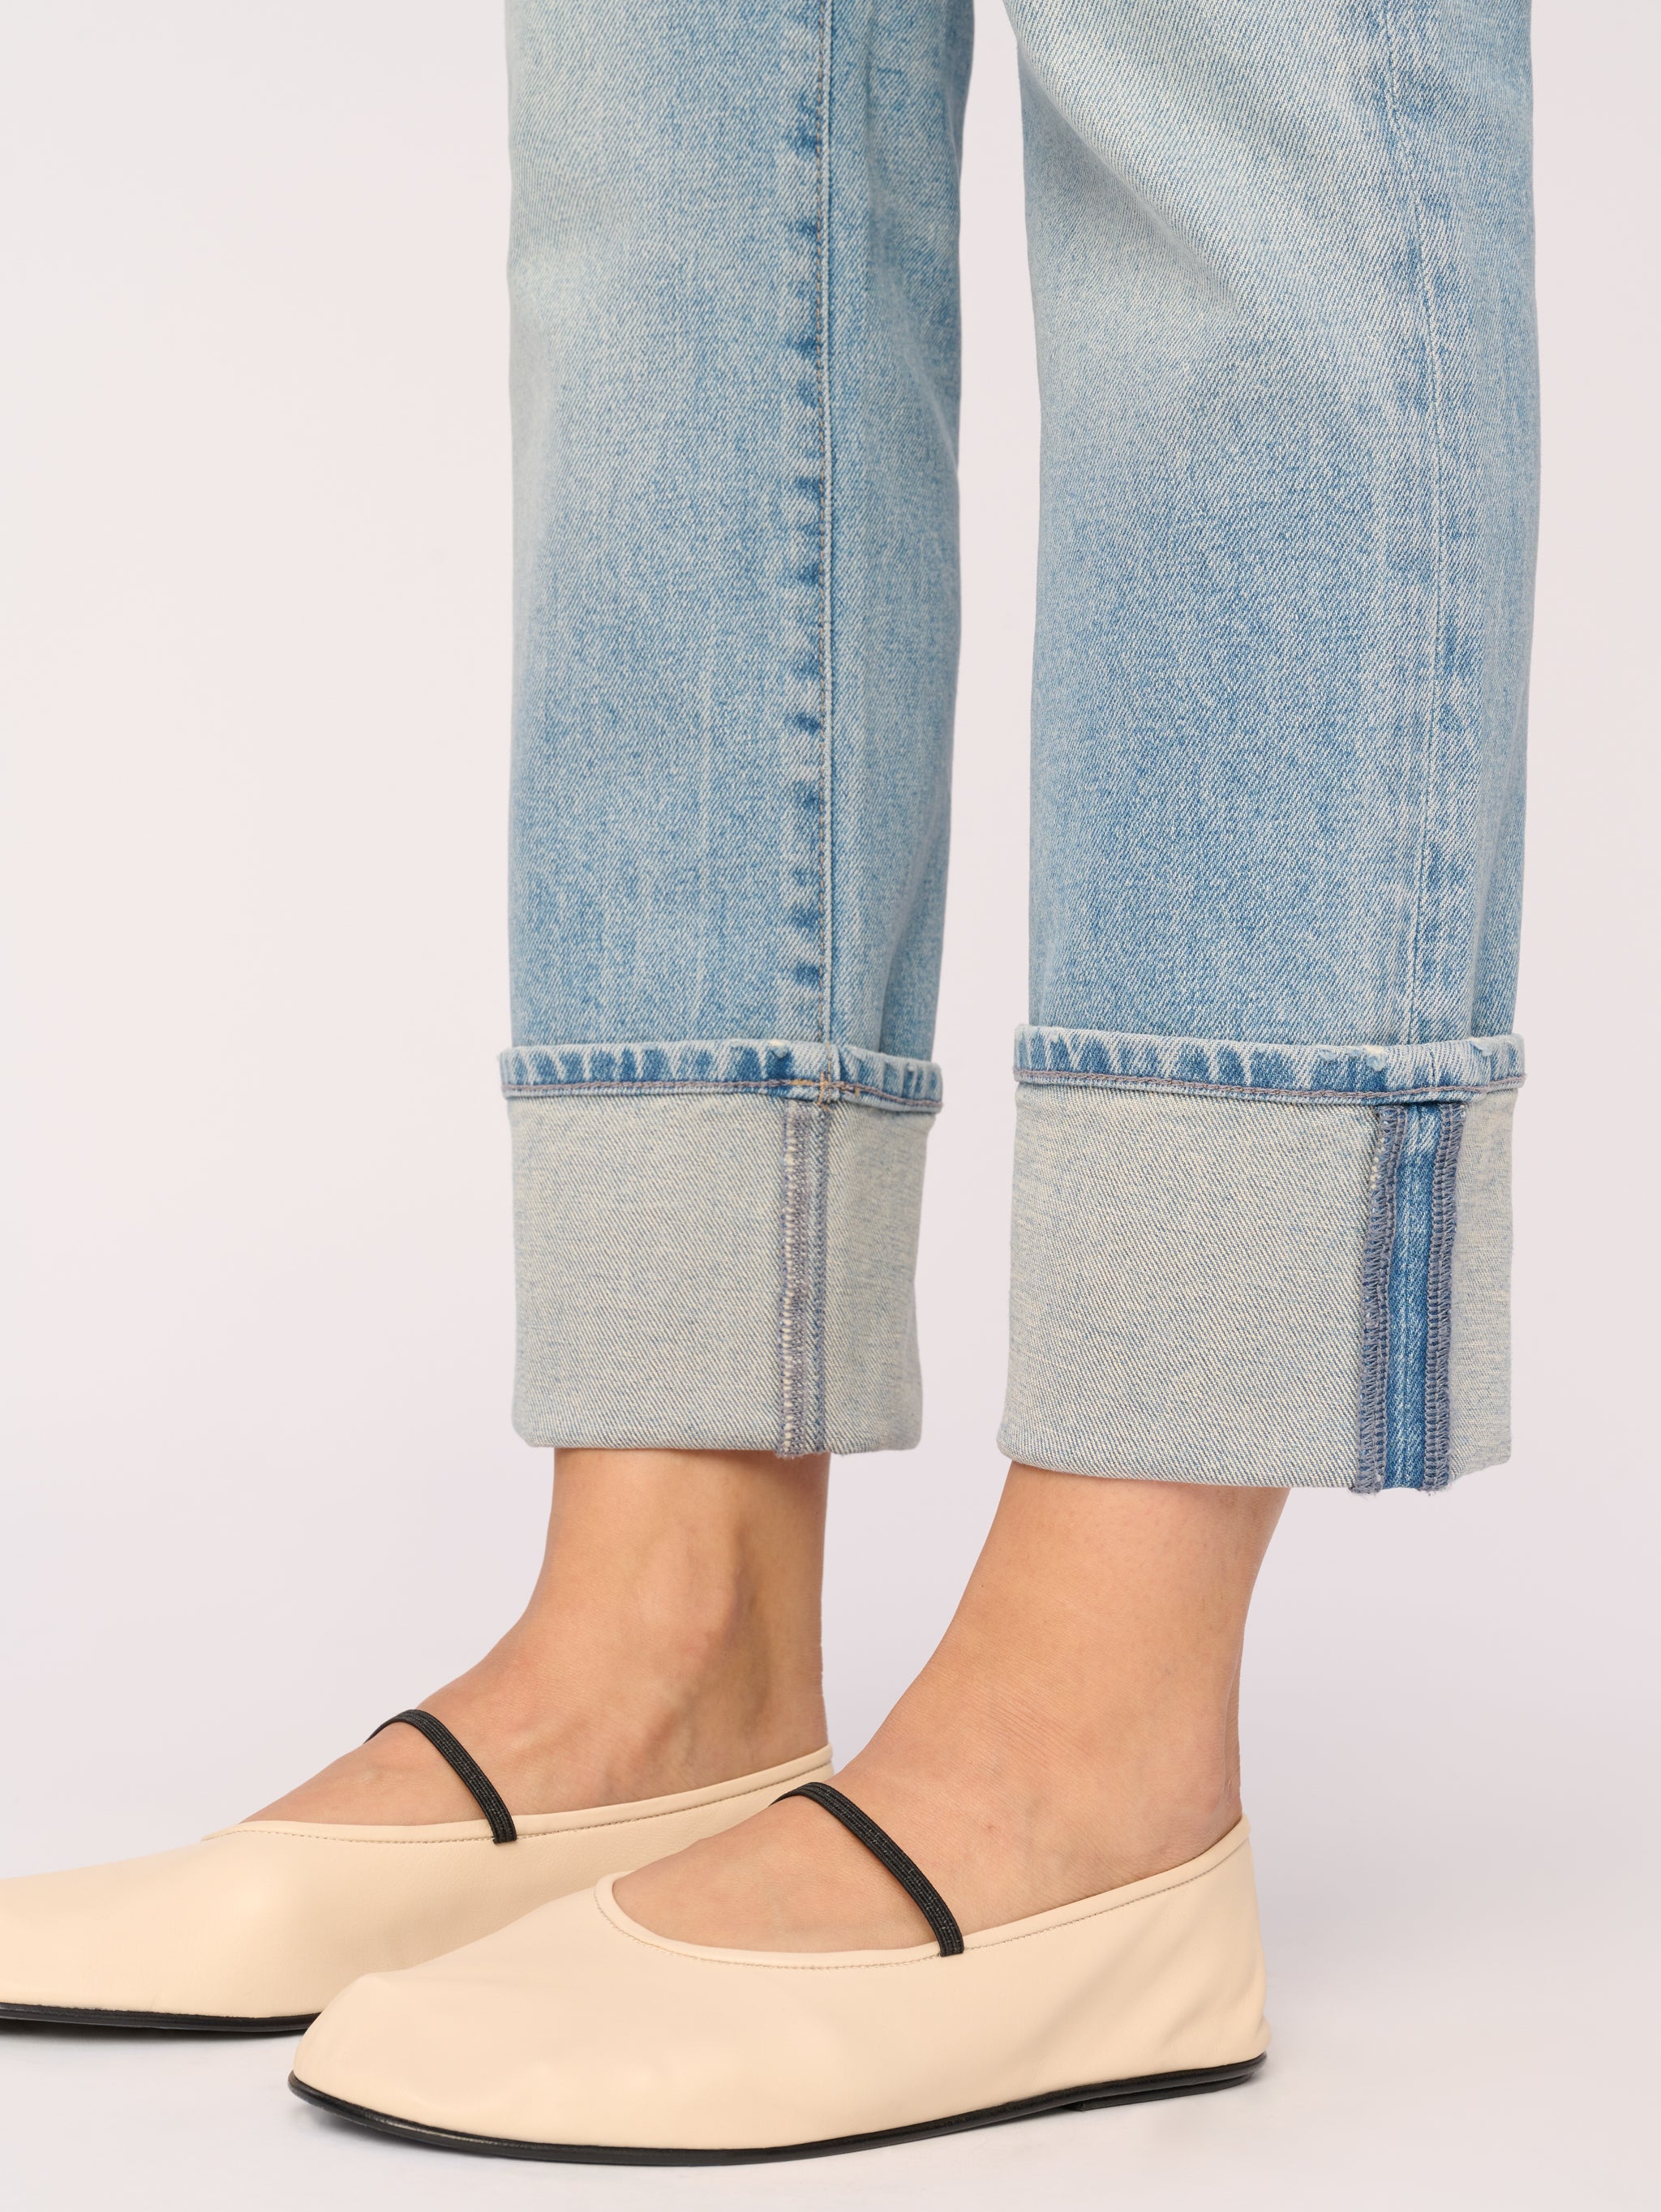 Patti Straight High Rise Vintage Ankle Jeans | Fiji Cuffed